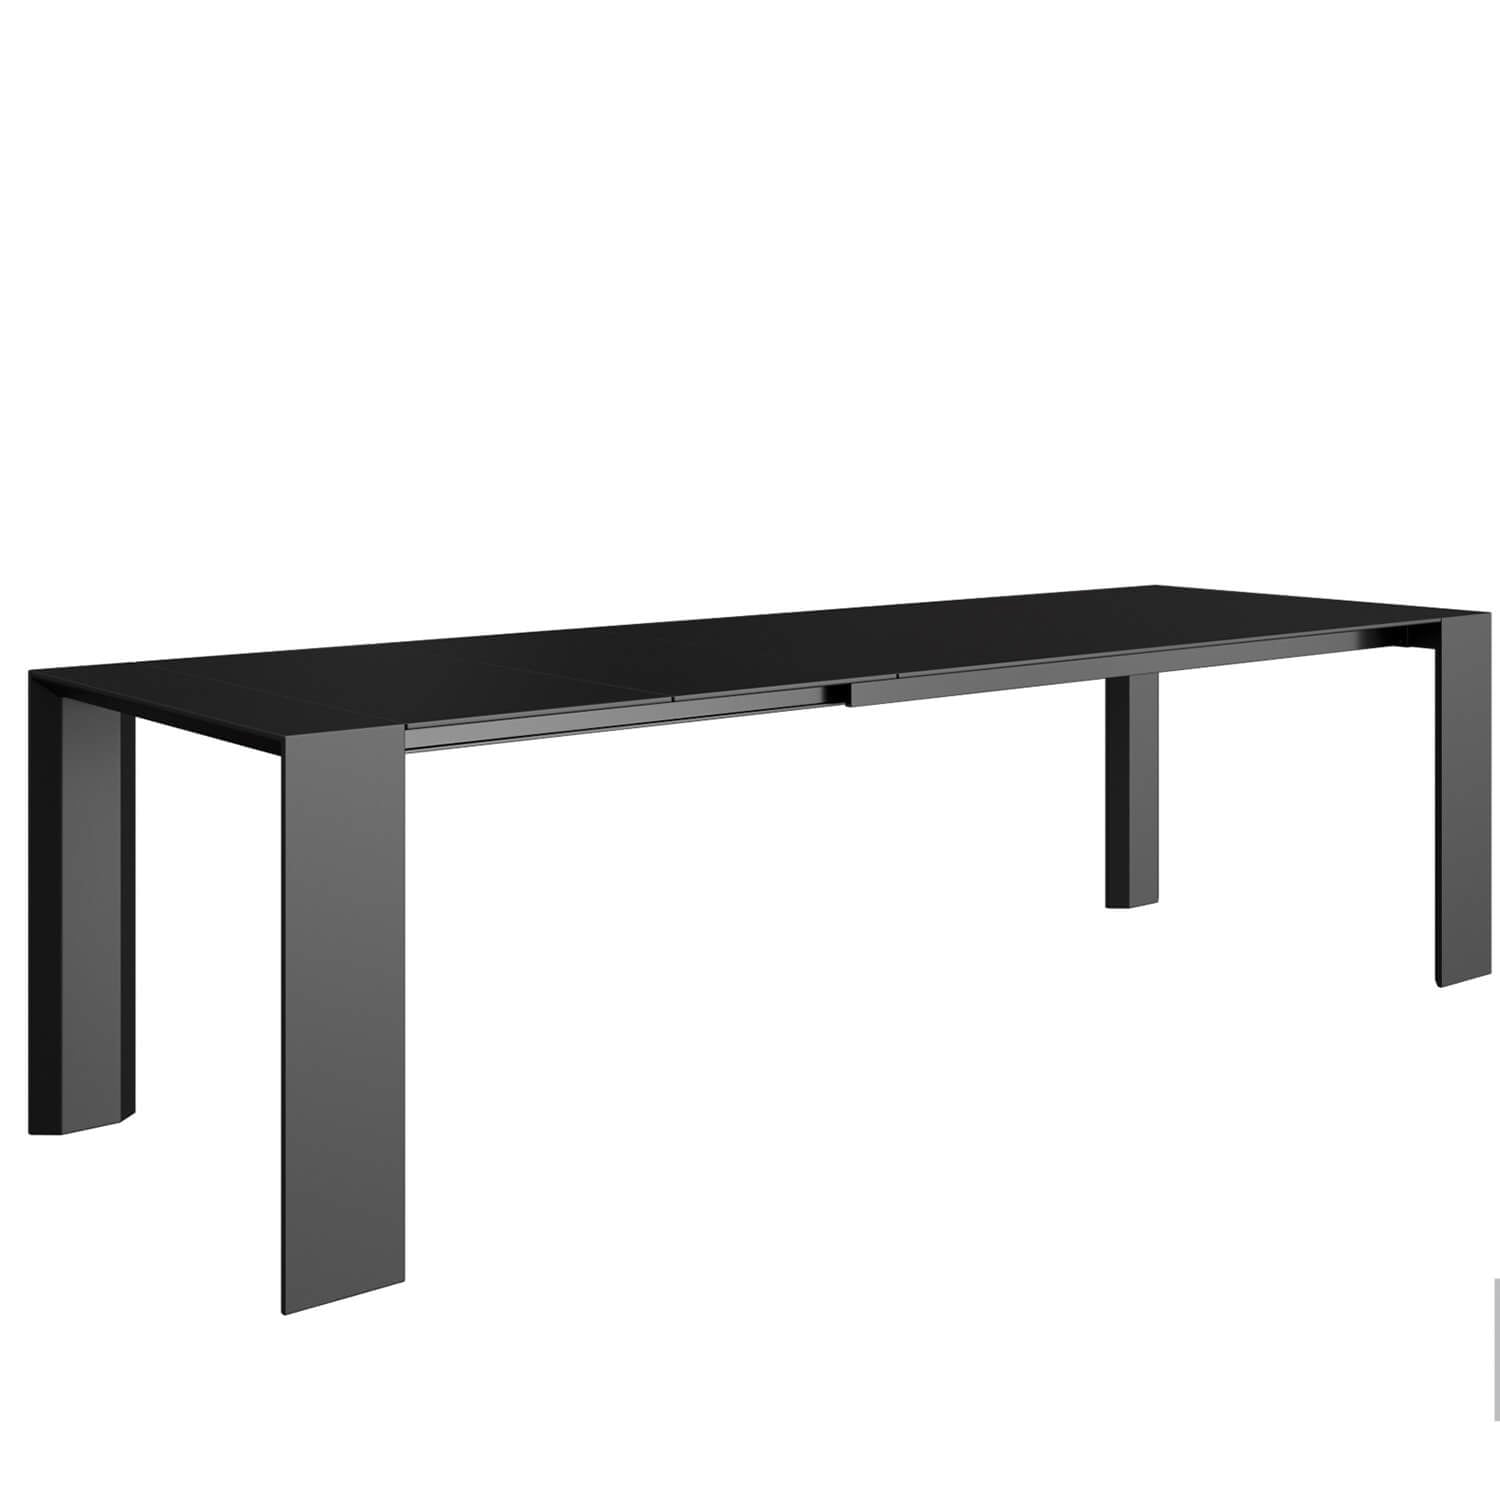 Soriano XL extension dining table